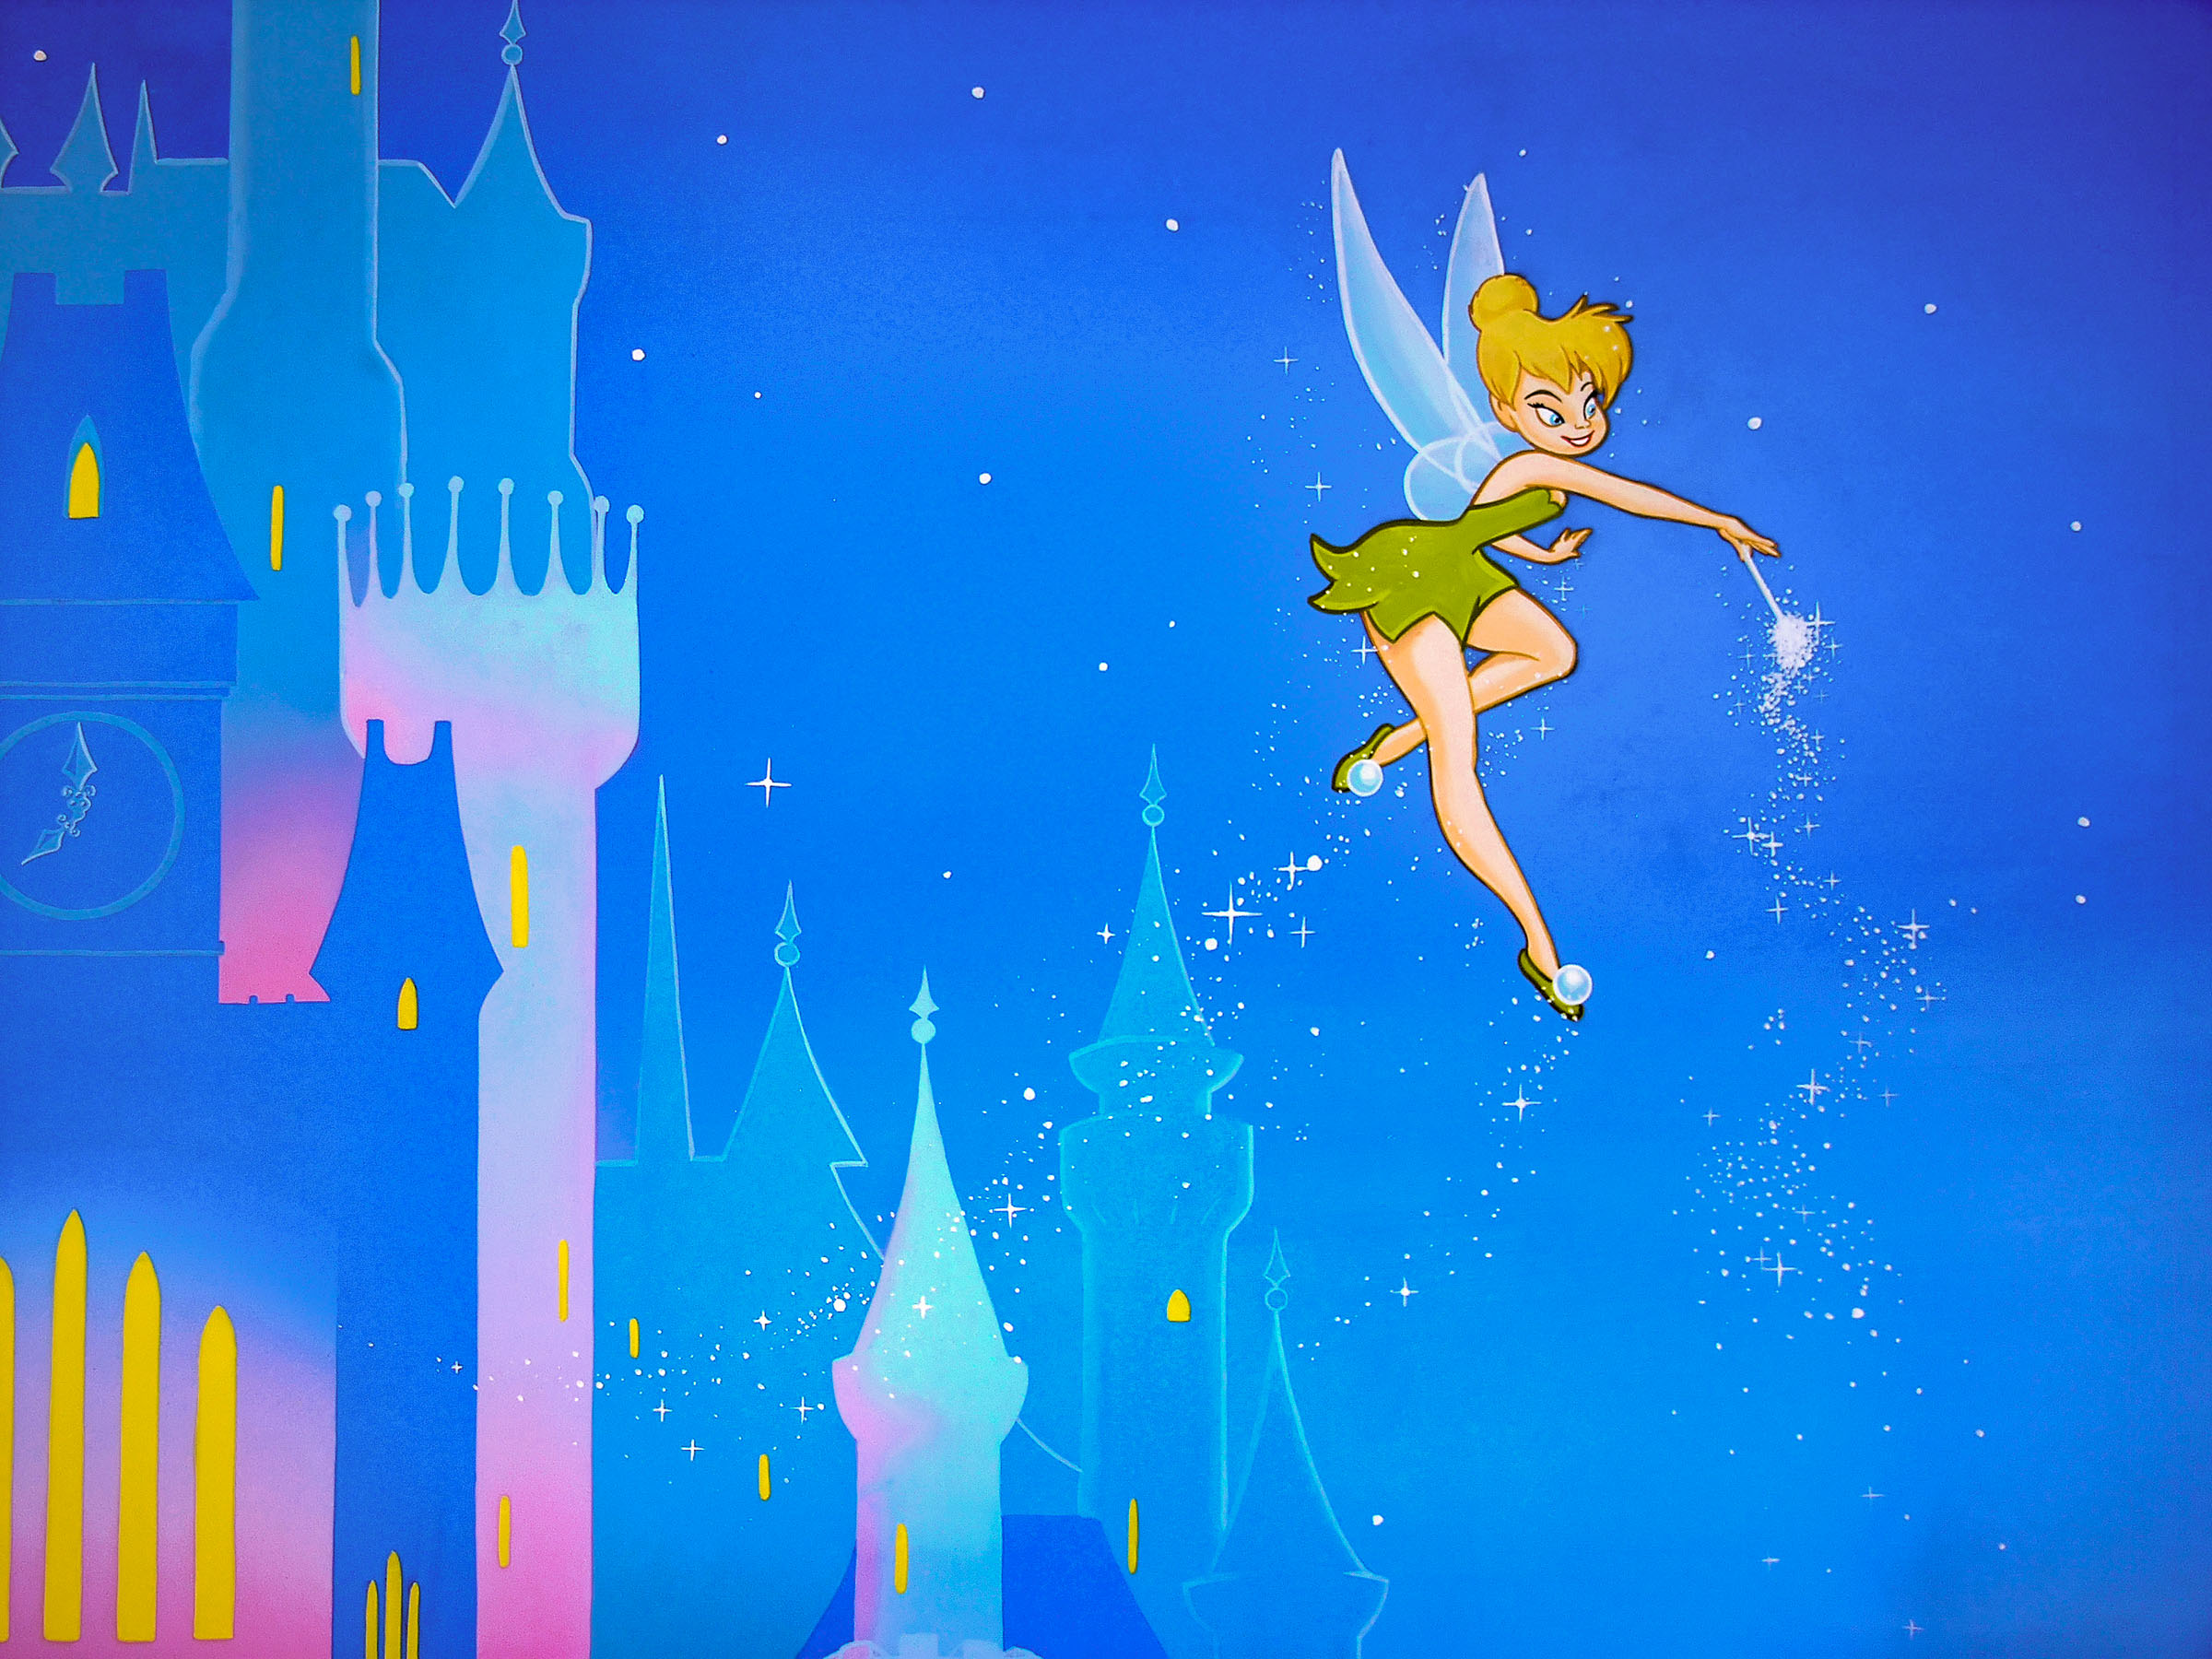 Peter Pan bedroom murals mural with Tinkerbell sprinkling fairy dust in front of turquoise blue disney style castle